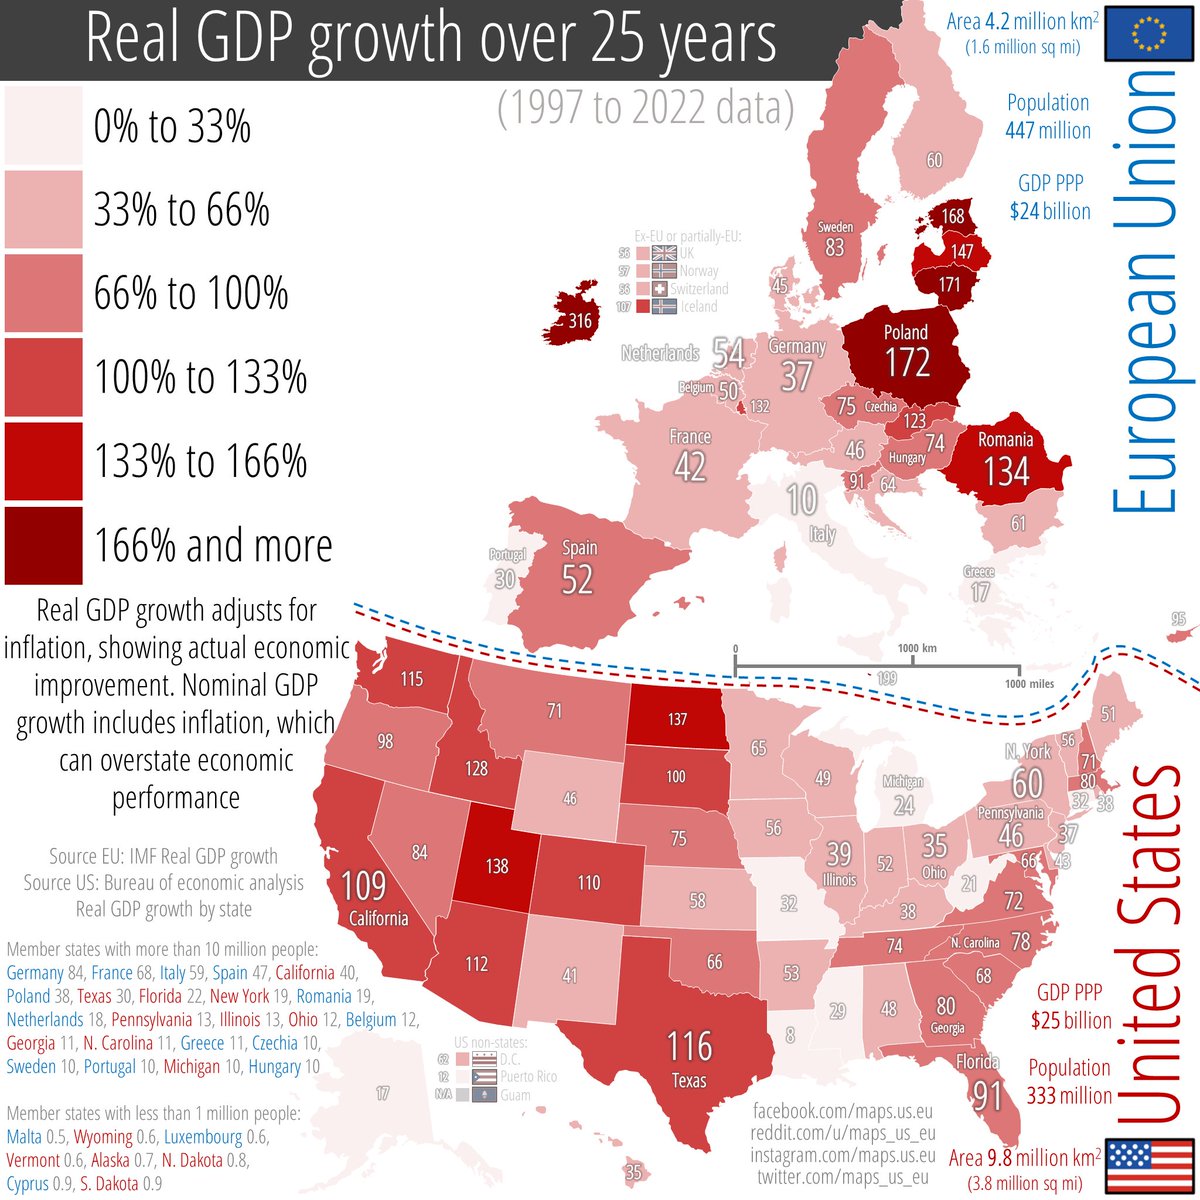 Real GDP growth over the past 25 years.

🇪🇺 vs 🇺🇸